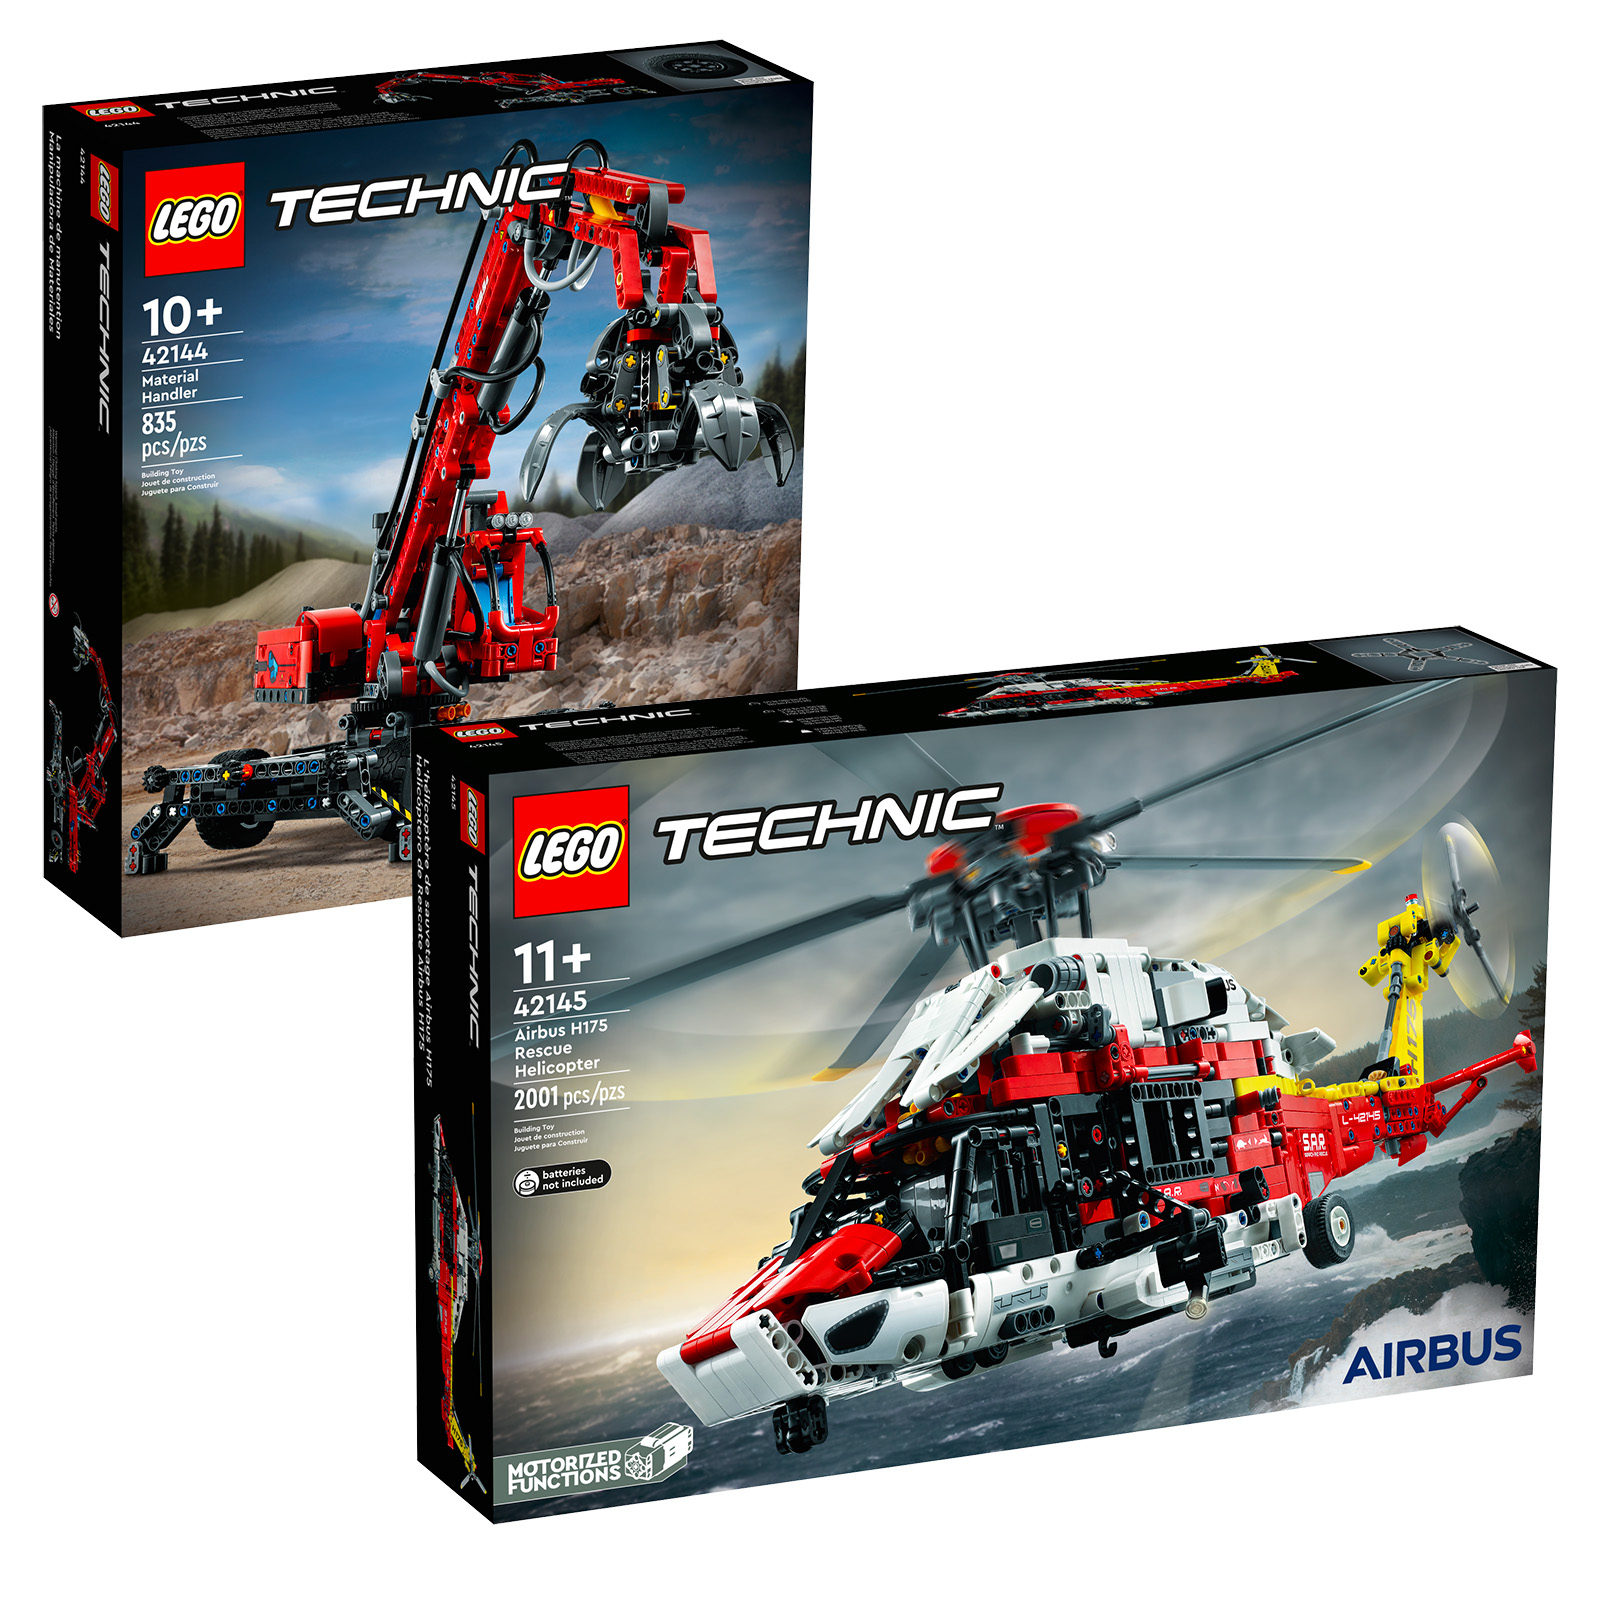 On the LEGO Shop: LEGO Technic 42144 Material Handler and 42145 Airbus H175 Rescue Helicopter sets are online